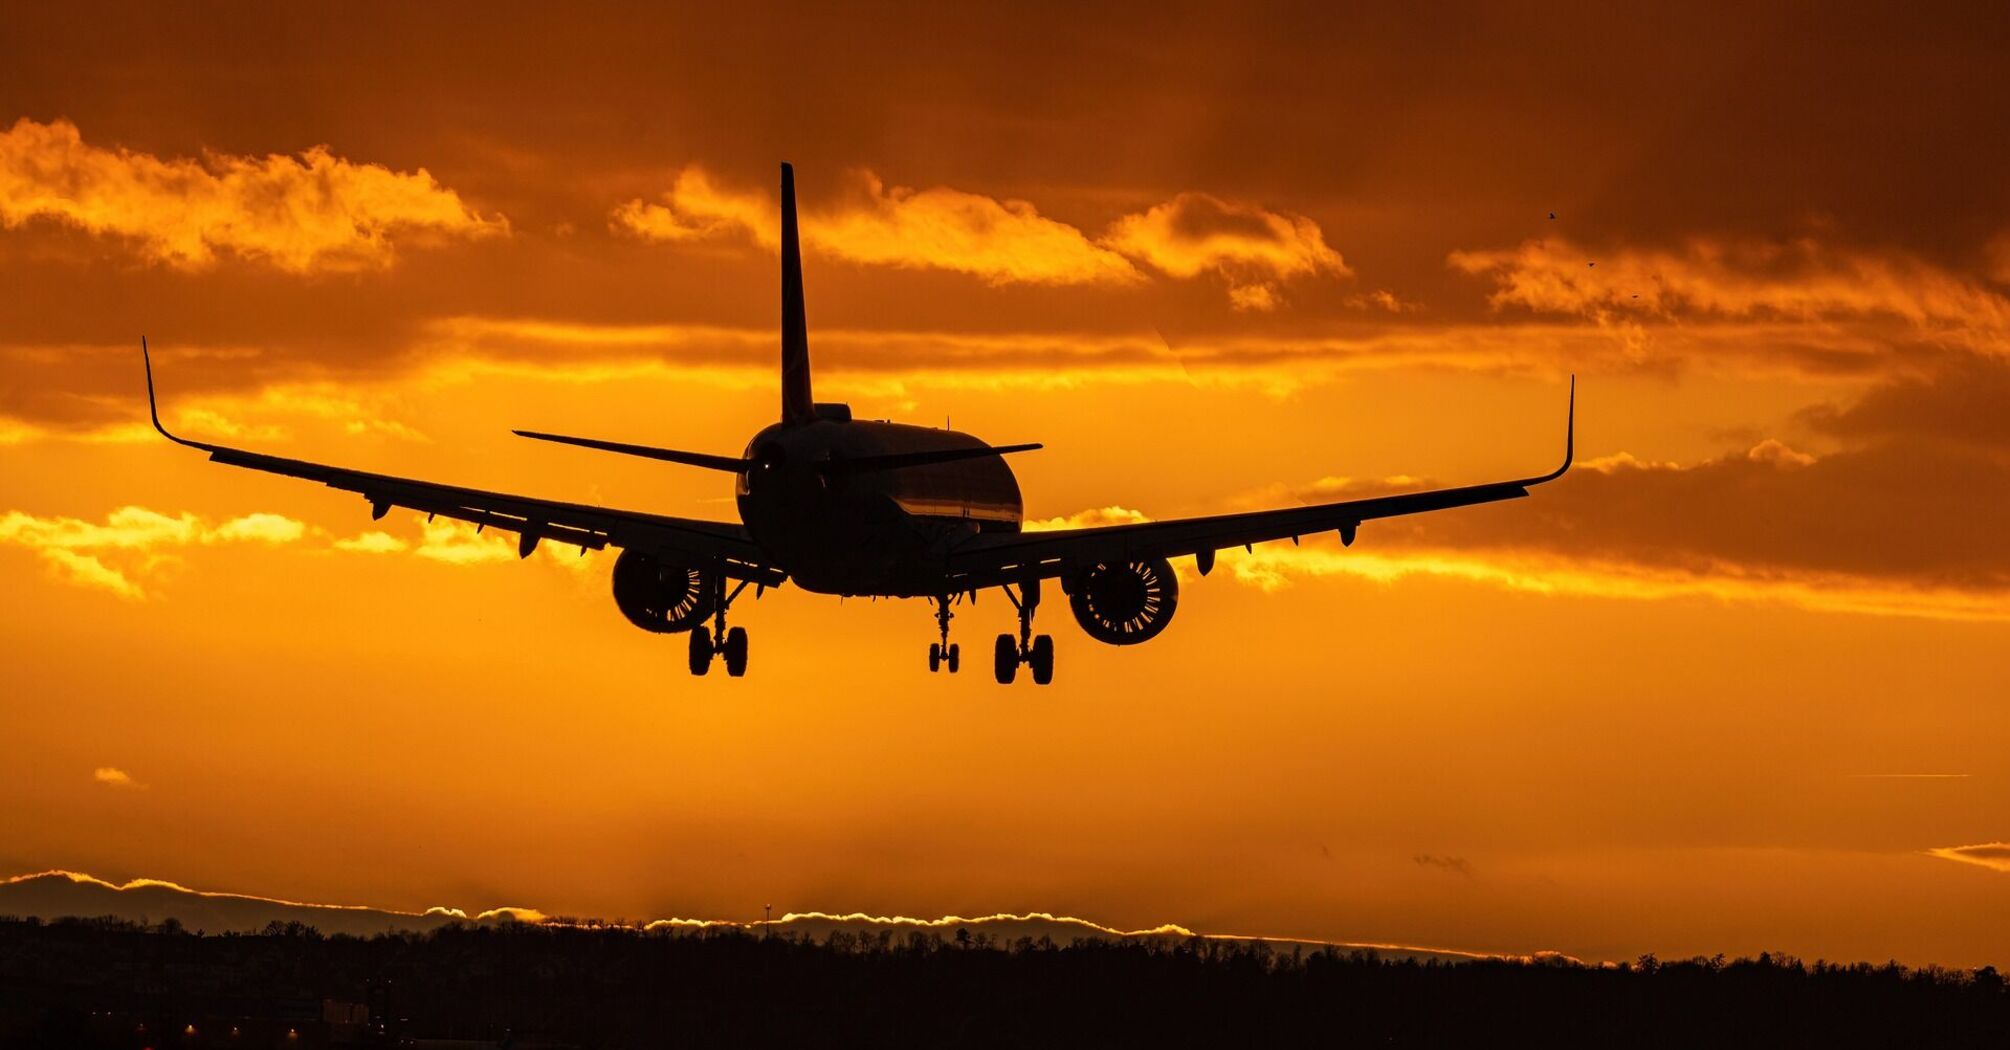 An airplane silhouetted against an orange sunset sky, preparing to land with landing gear deployed 